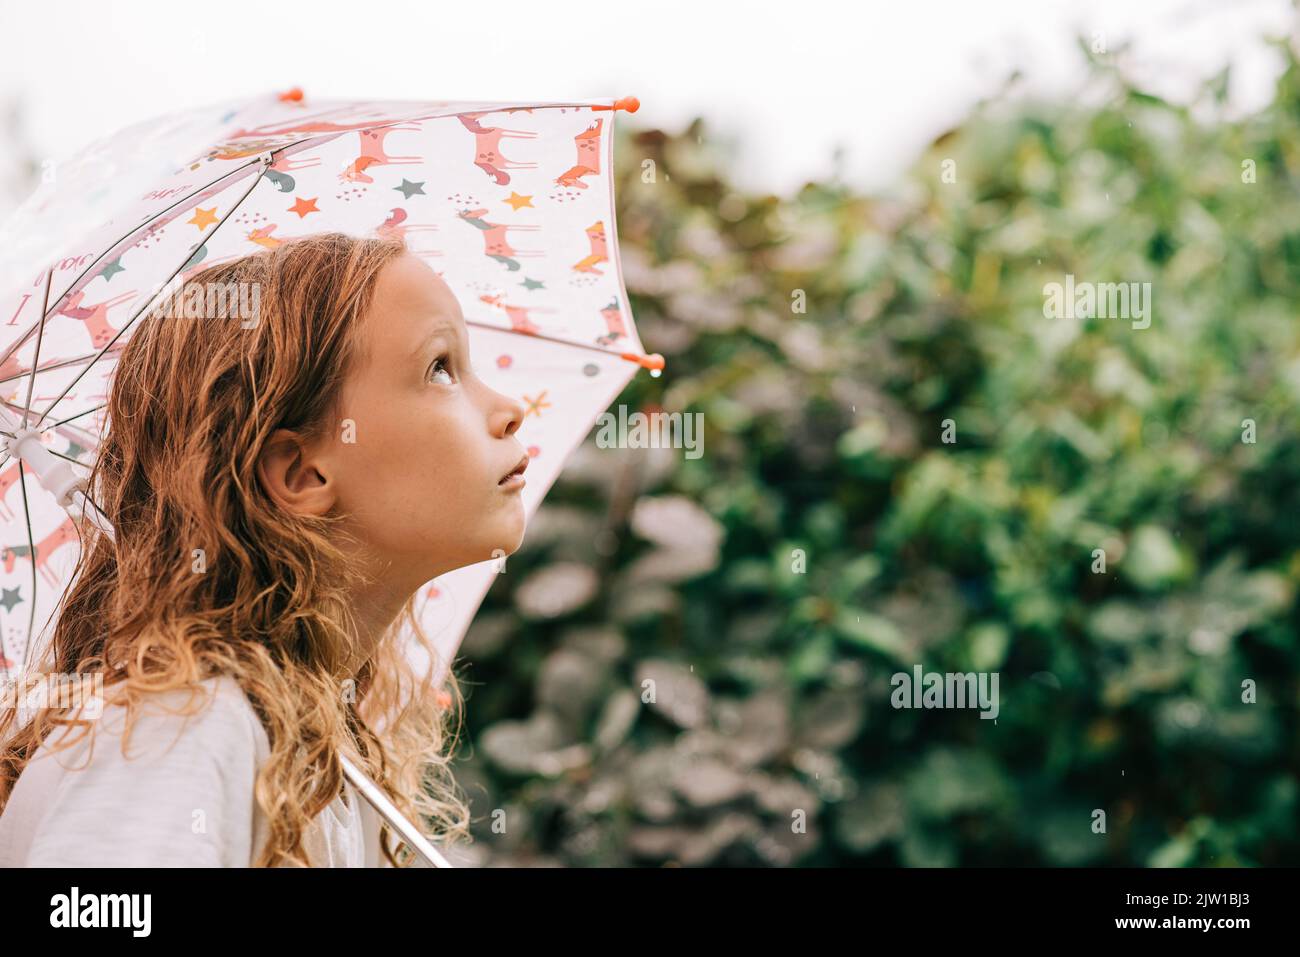 child holding an umbrella looking up at the sky at the rain Stock Photo